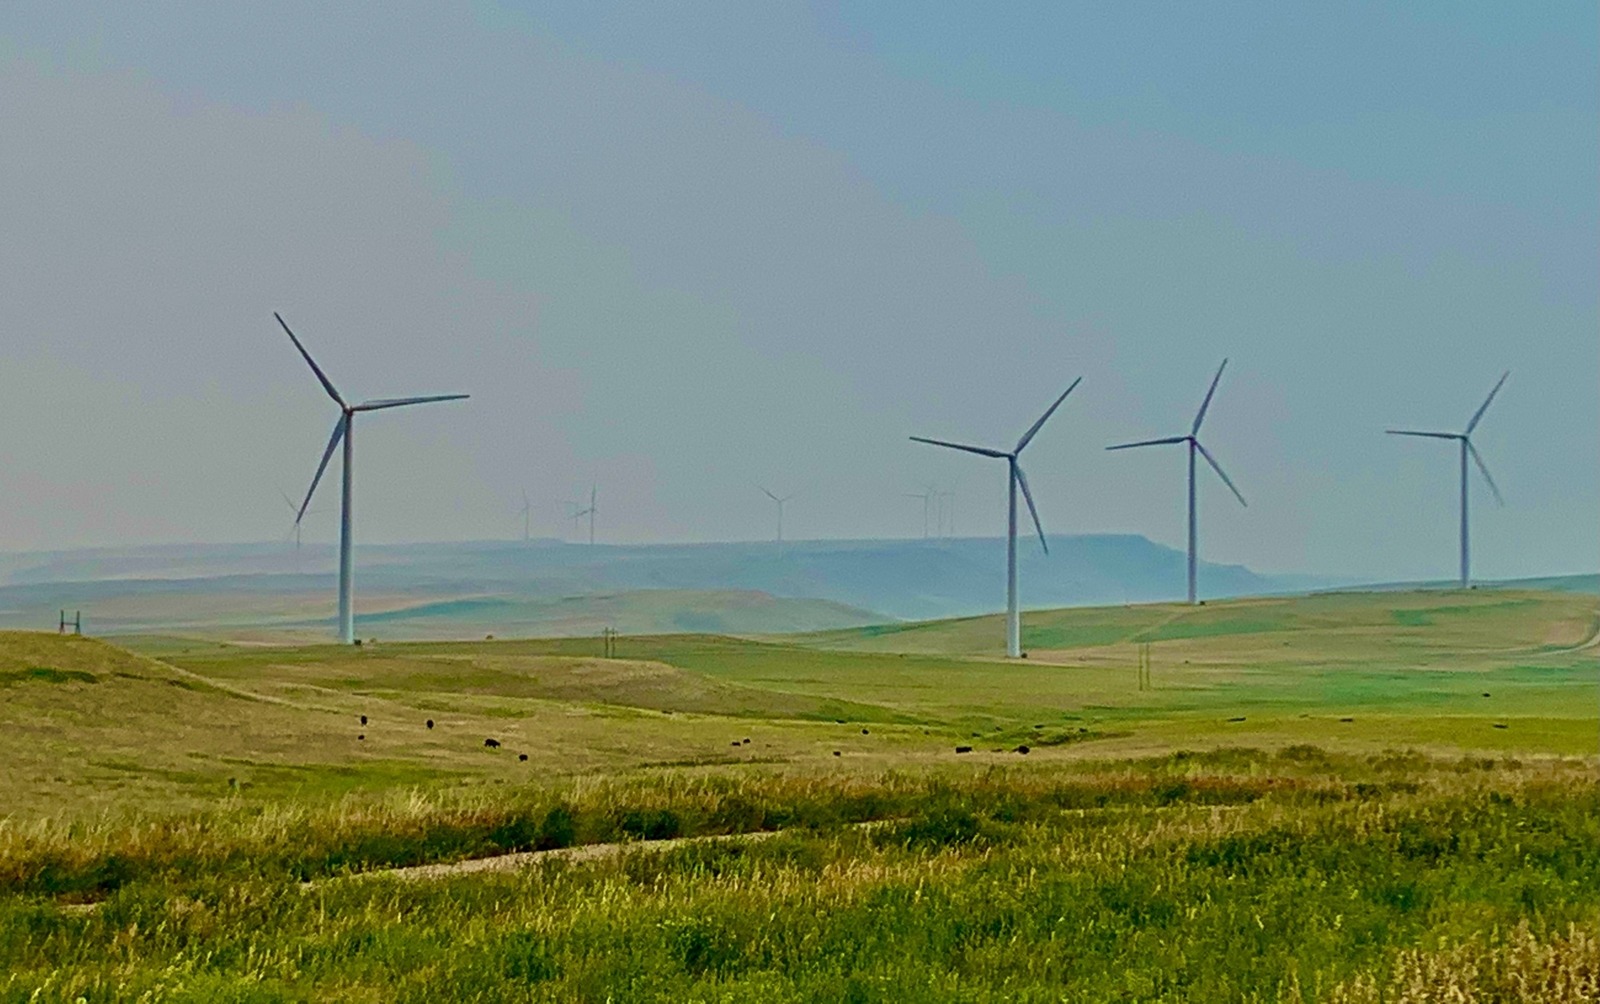 Wind farms are growing across the West, including here in central Montana's Judith Basin. But with increasing electricity demand, David Marston writes that nuclear energy may be a key contributor to a solution. Photo by Todd Wilkinson